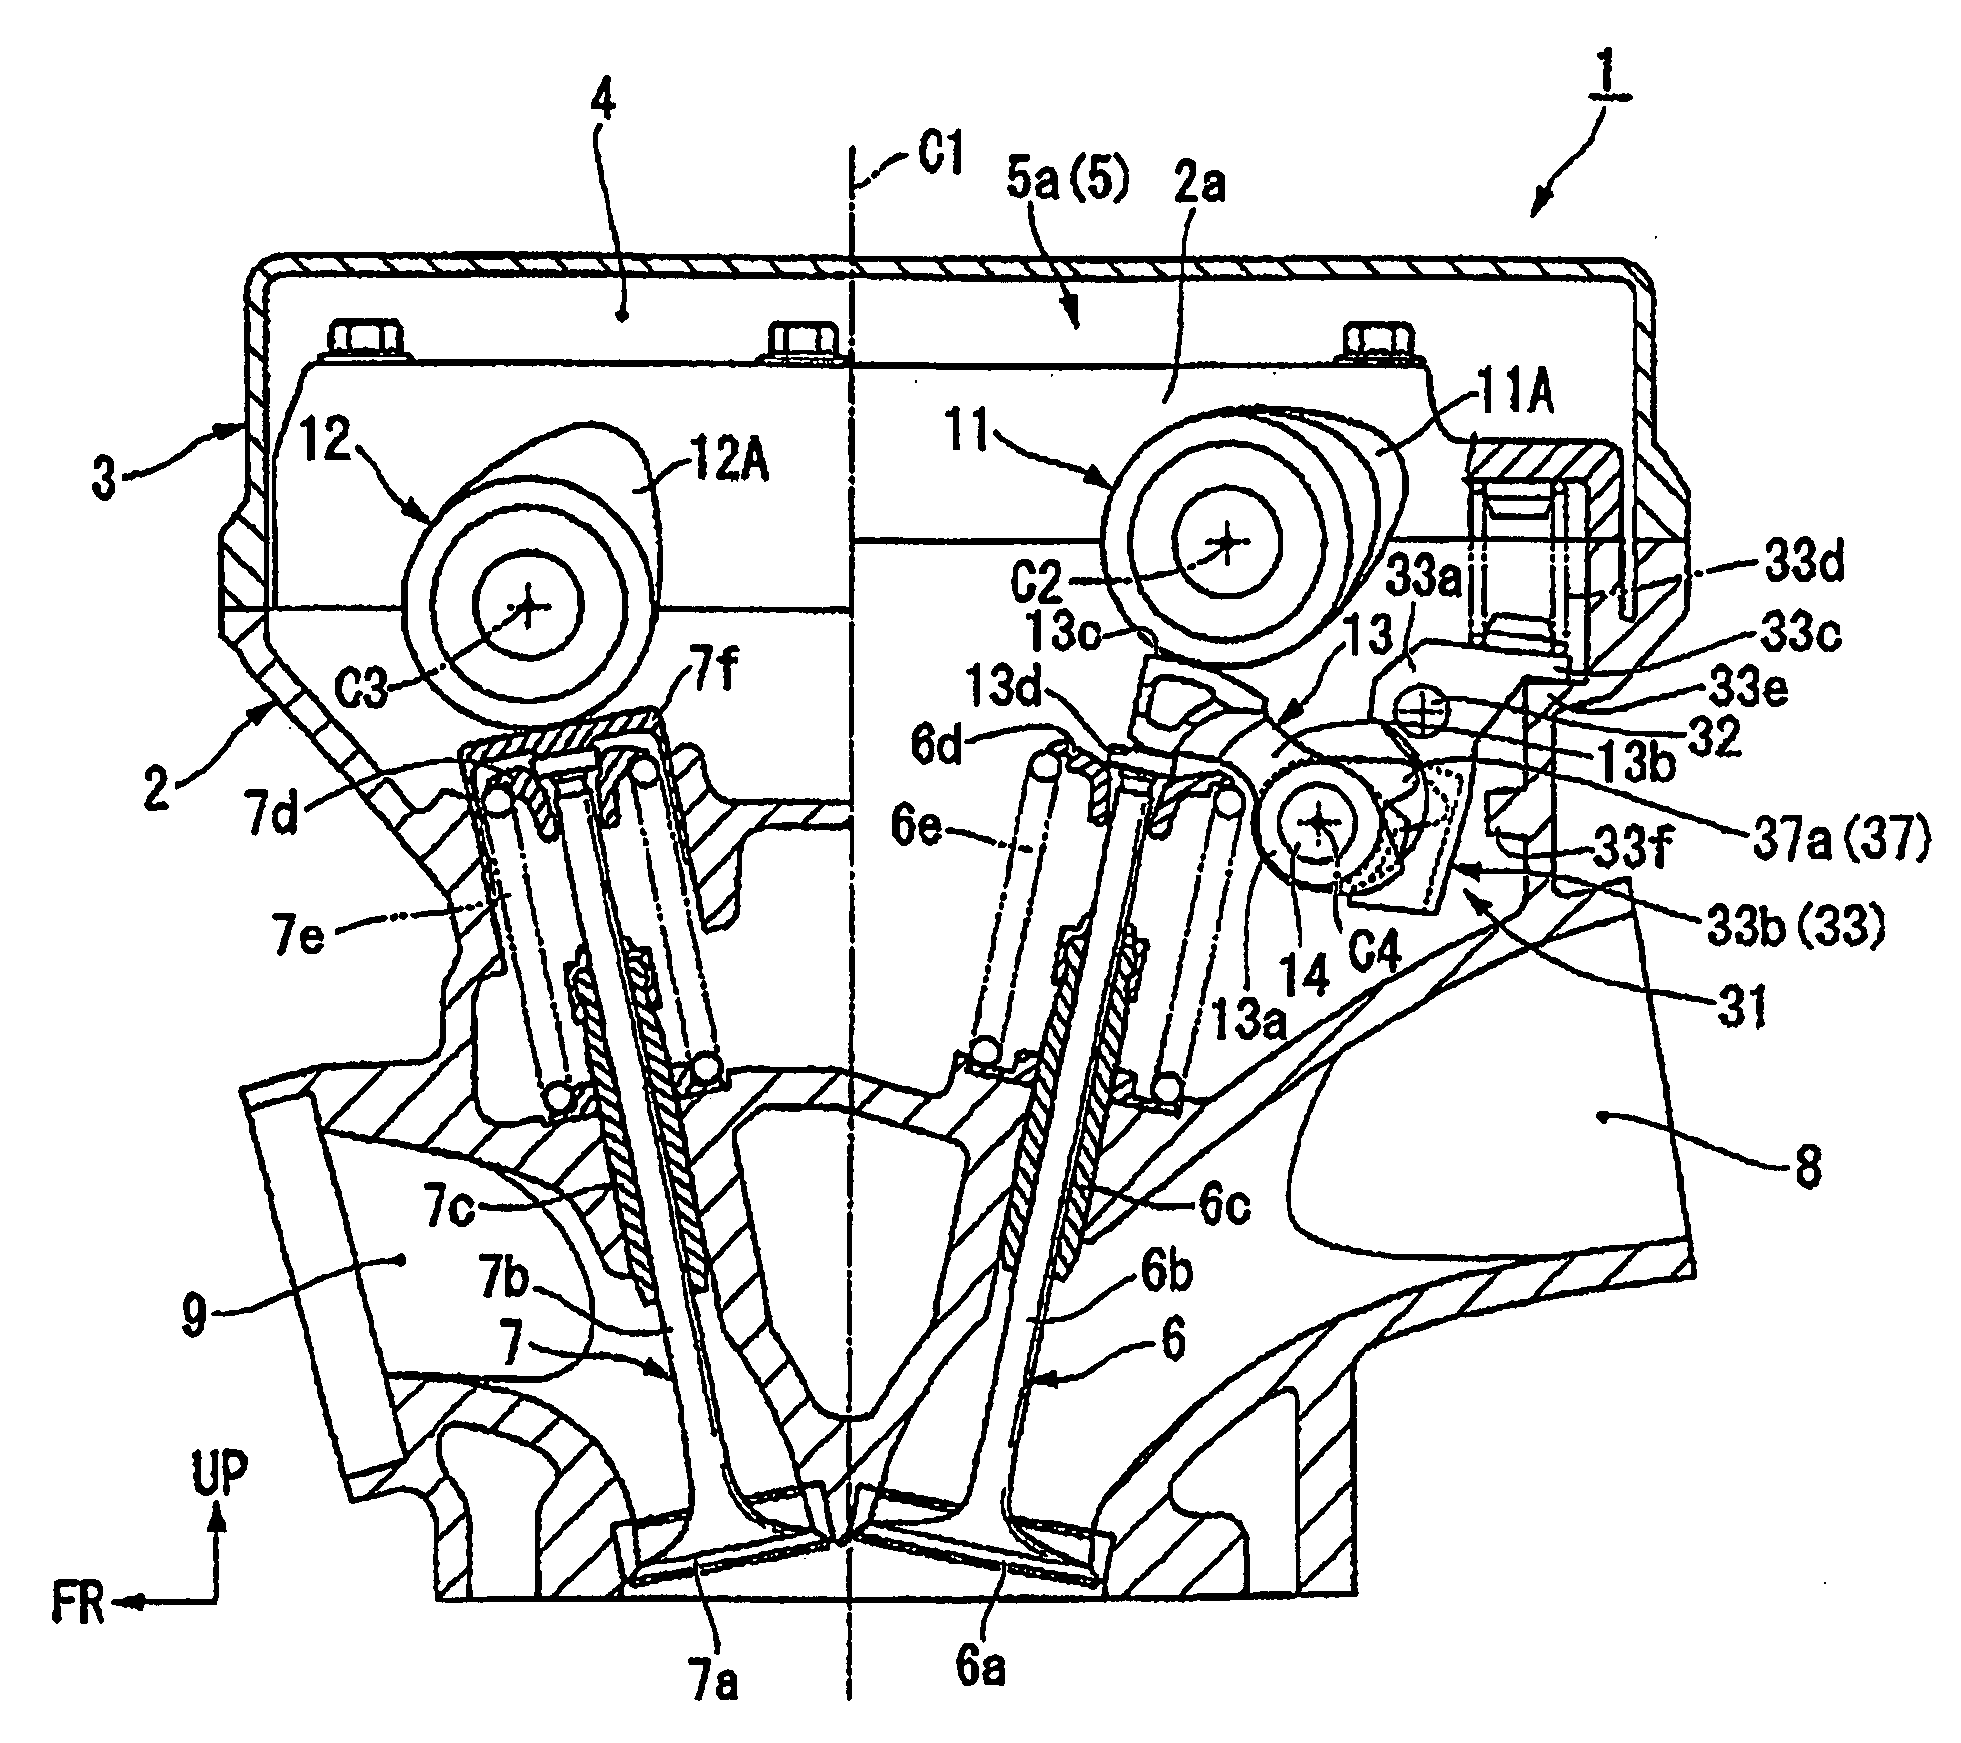 Valve-actuating system for an internal combustion engine, engine incorporating same, and method of using same